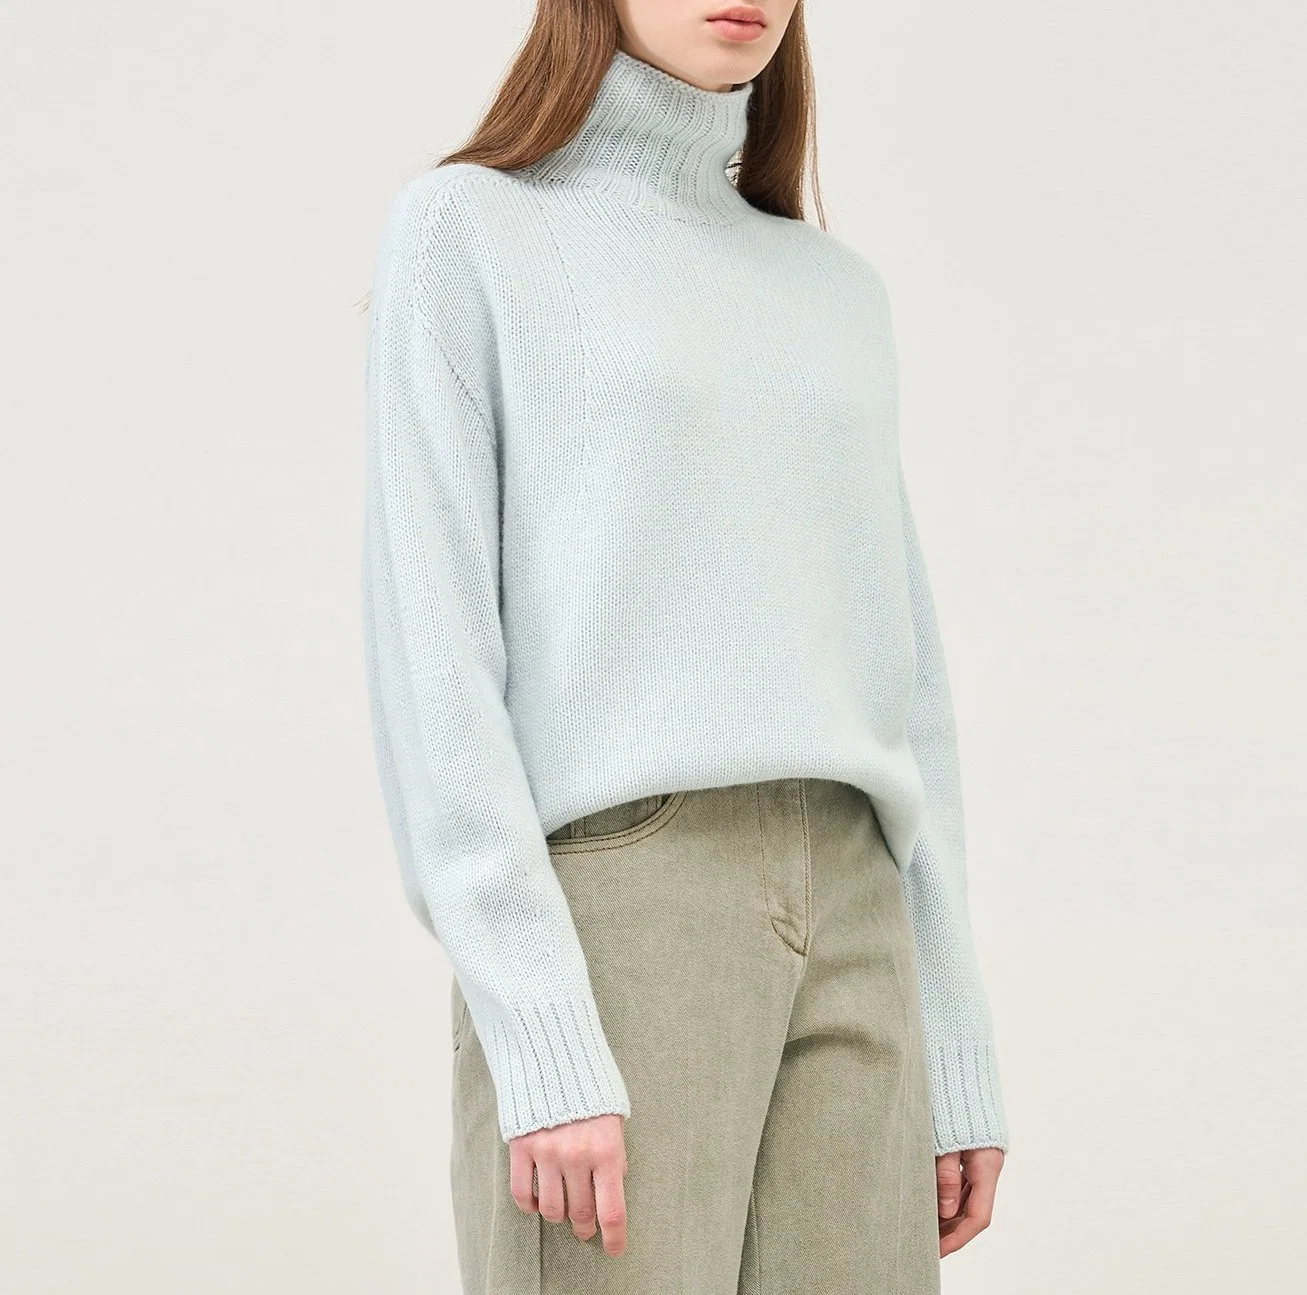 Women&prime; S Fashion Knitted Rib Turtleneck 100% Cashmere Jumper Sweater